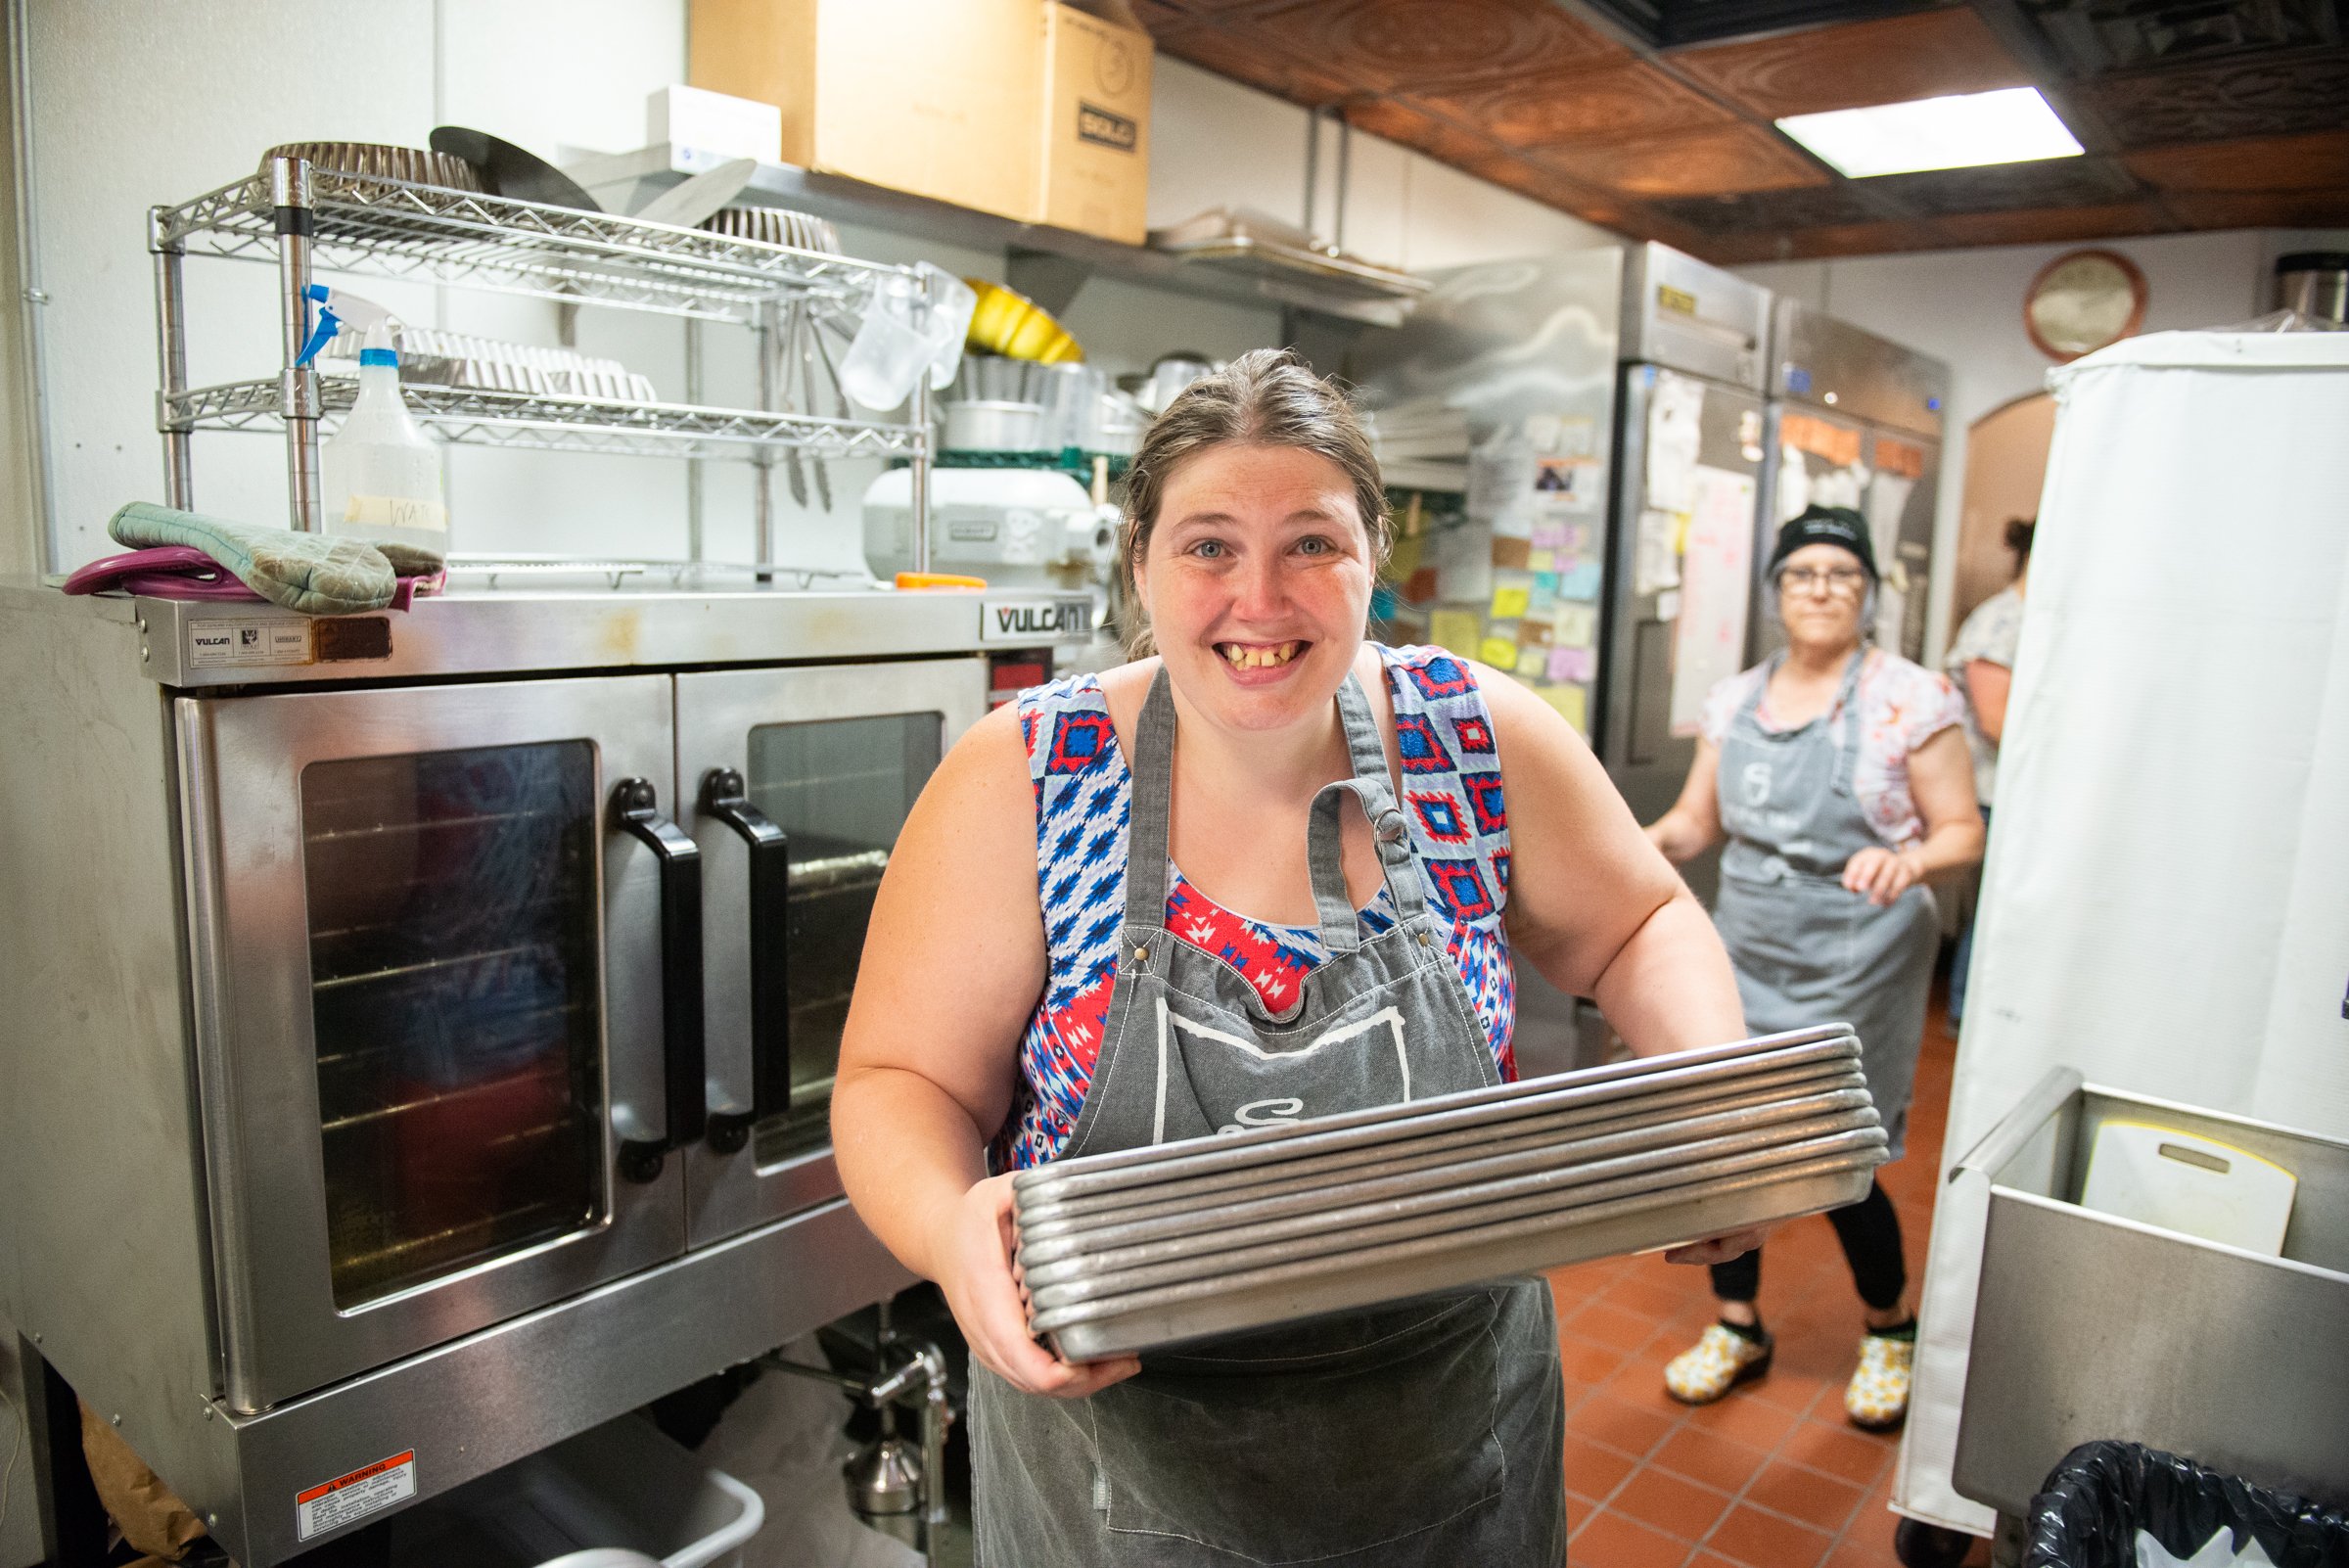 Helen puts clean dishes away at Soltane Café